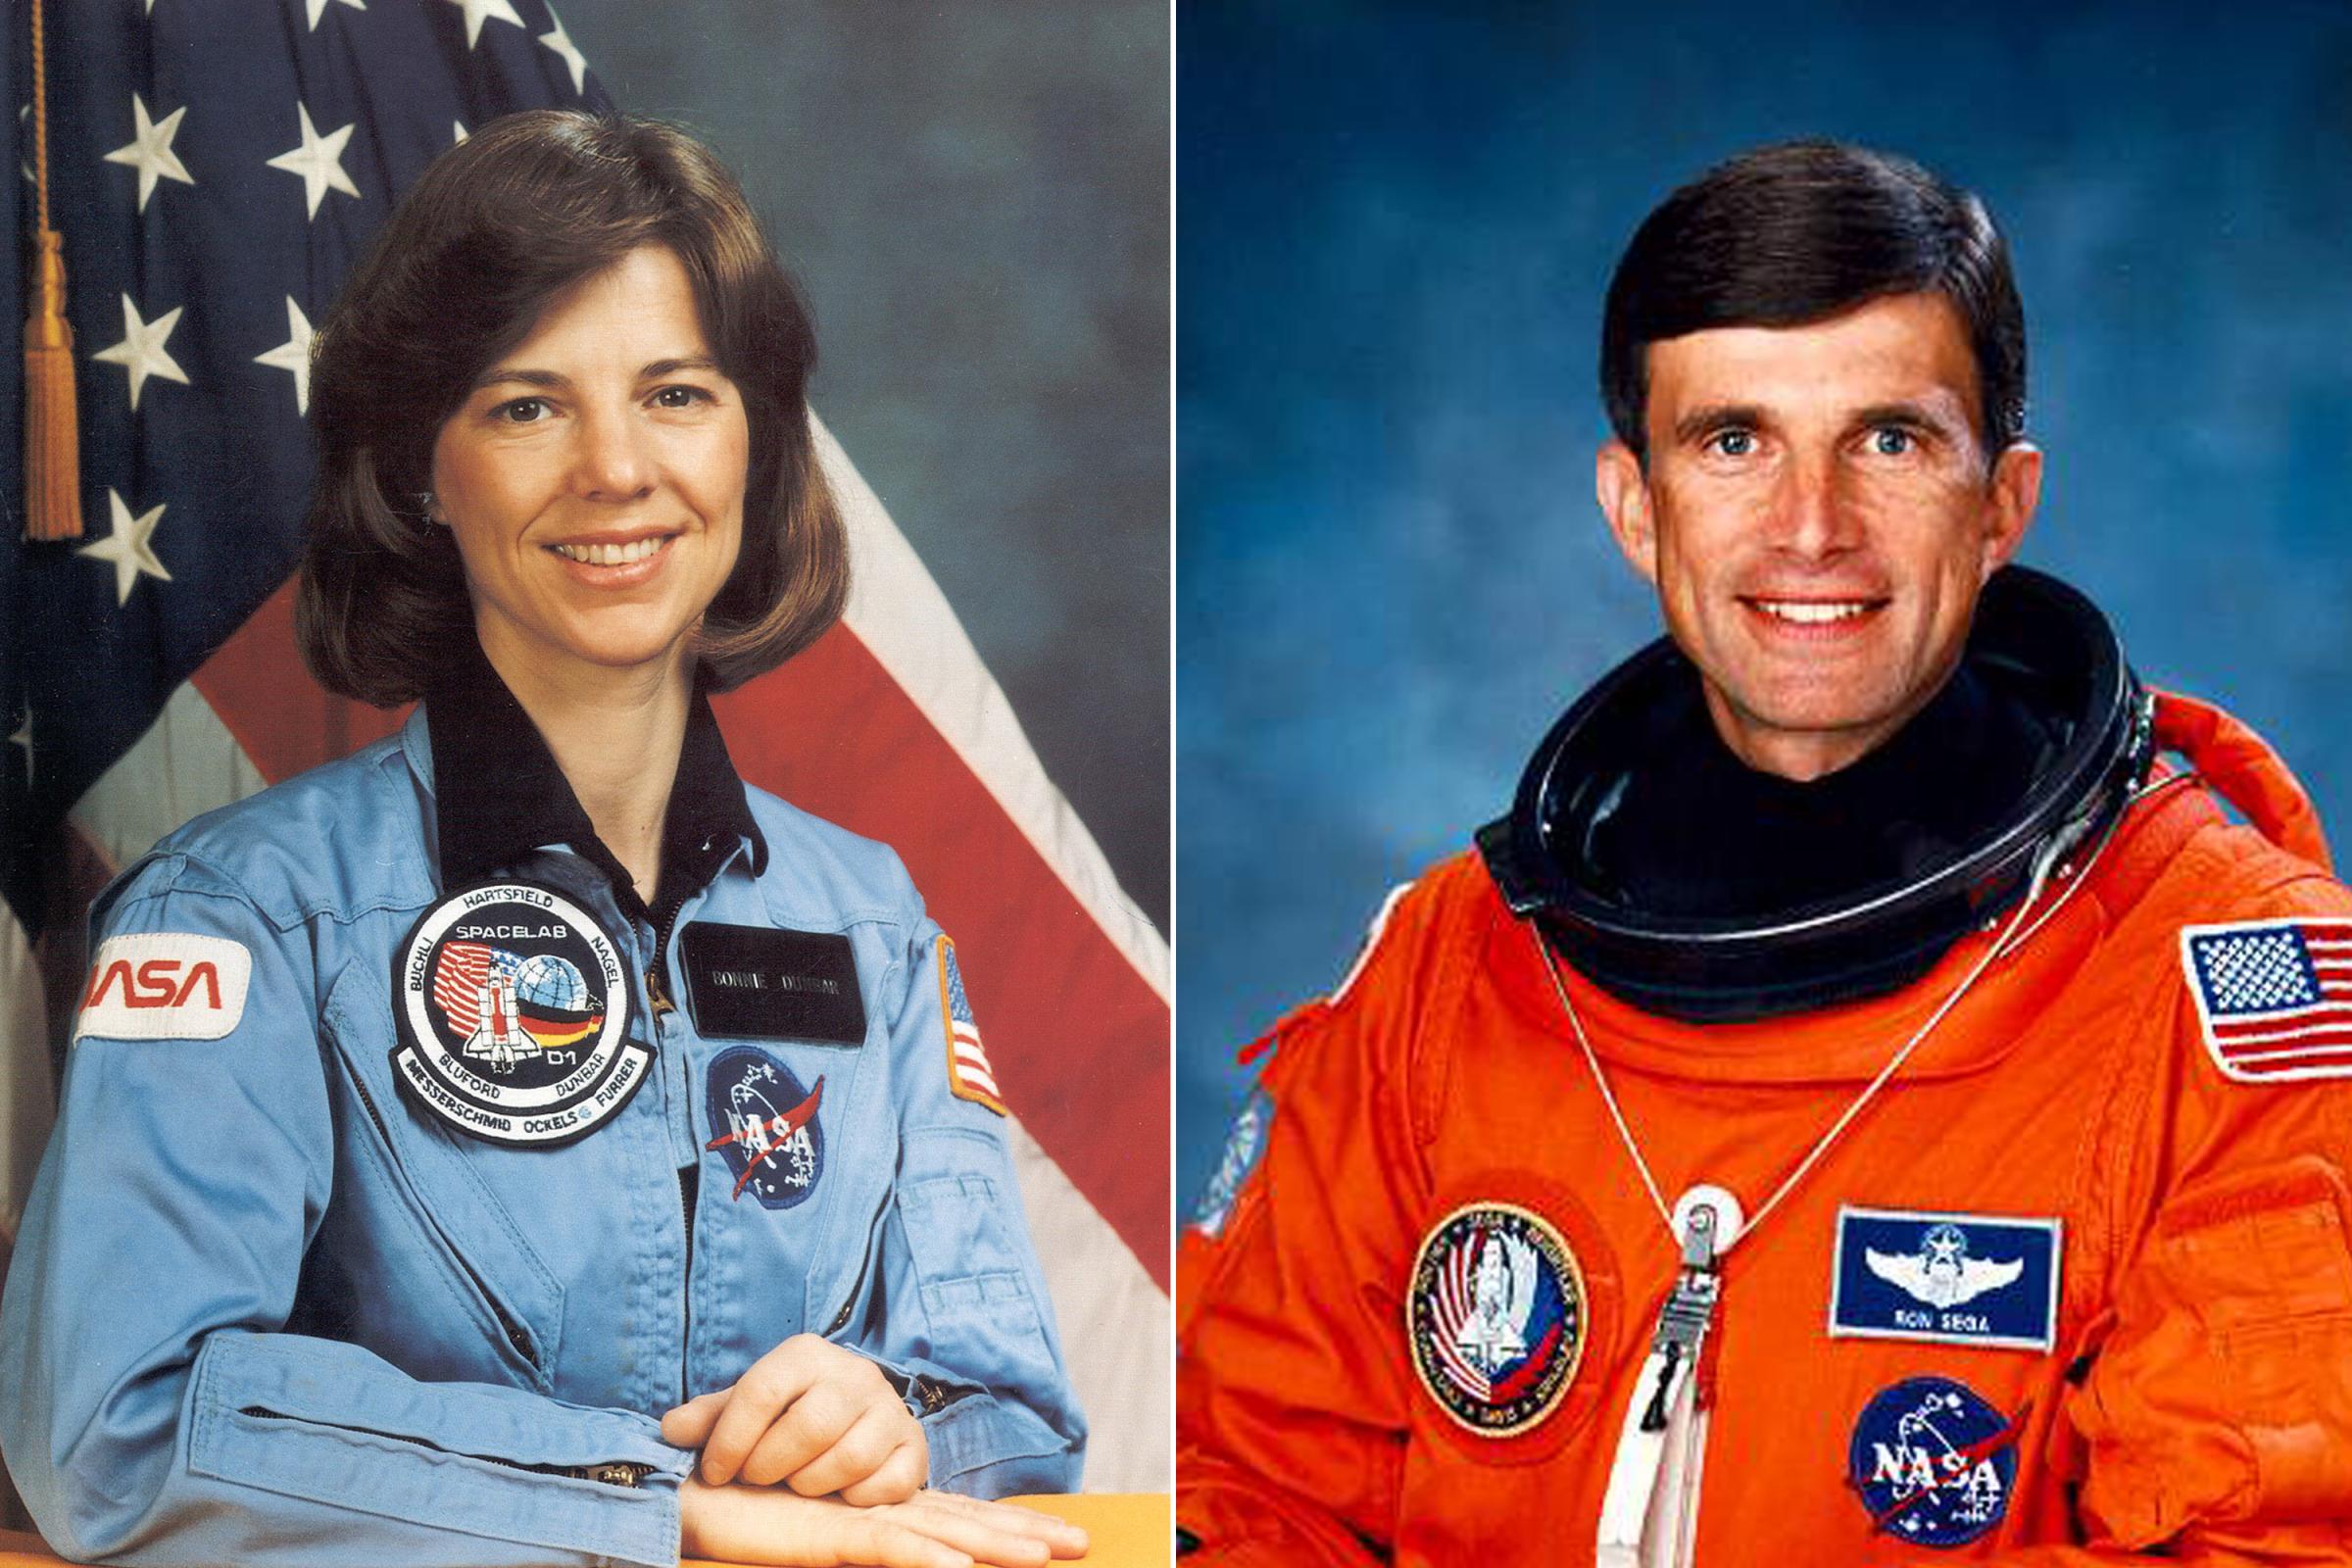 Bonnie Dunbar and Ron Sega married in 1988. Dunbar is a veteran of five space flights, logging more than 1,208 hours in space. Sega was an astronaut for 5 years, during which he flew aboard the STS-60, the first joint U.S./Russian Space Shuttle Mission, launched in 1994.